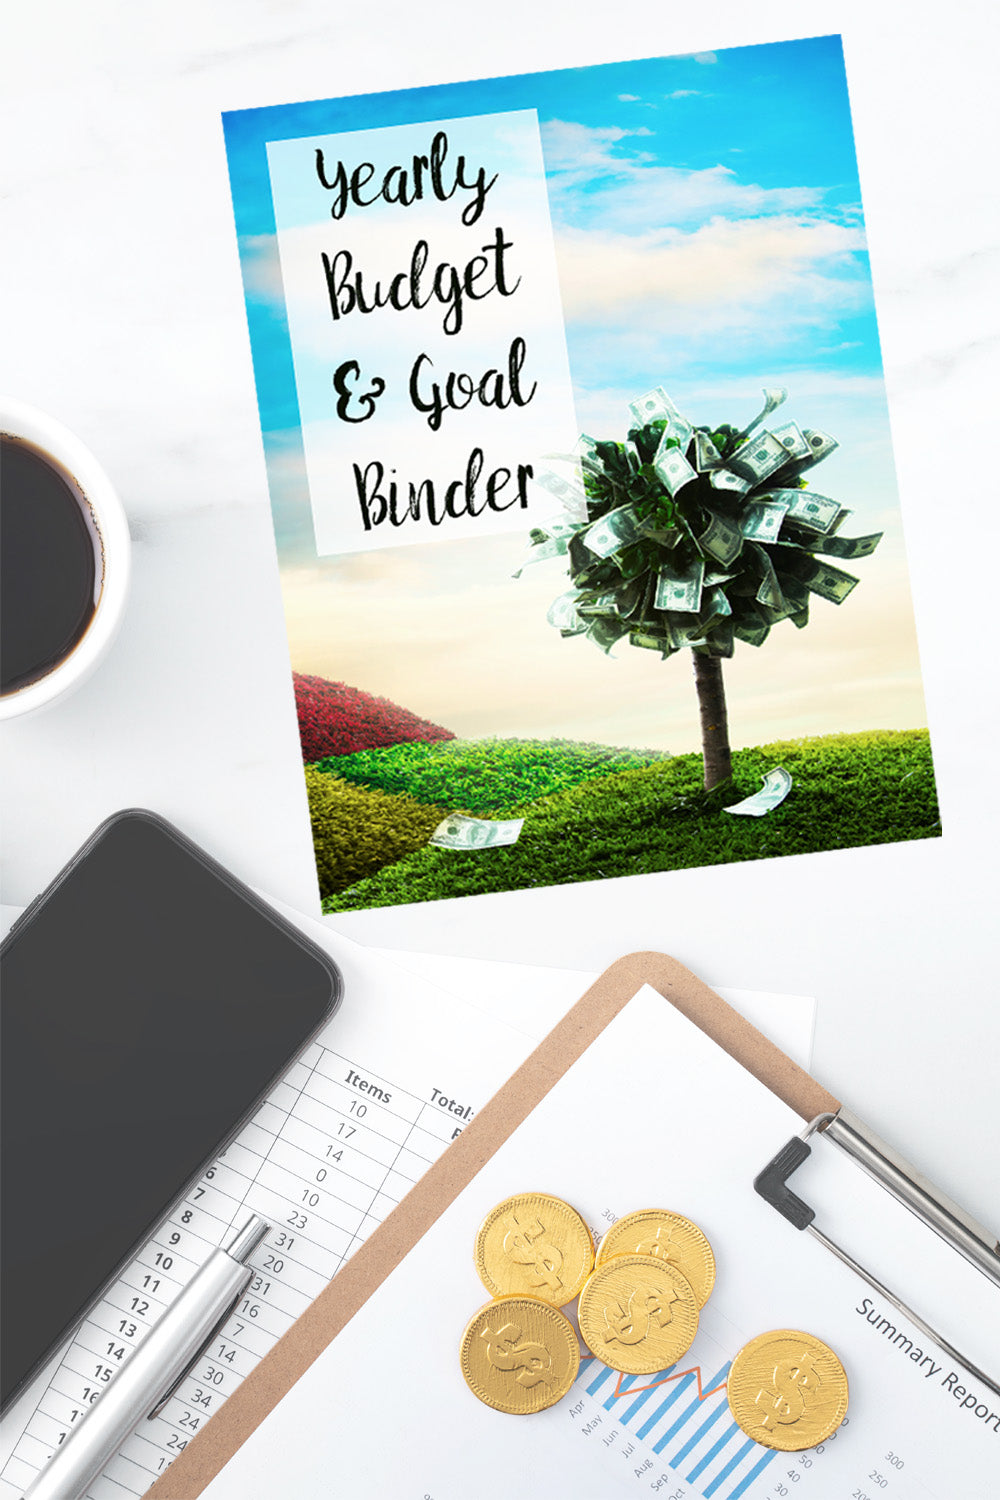 Looking to track your expenses, make a budget, and set financial goals? Then this simple product is exactly what you're looking for. Goal worksheets (yearly, quarterly, & monthly); monthly expense & budget worksheets; and yearly budget summary. 